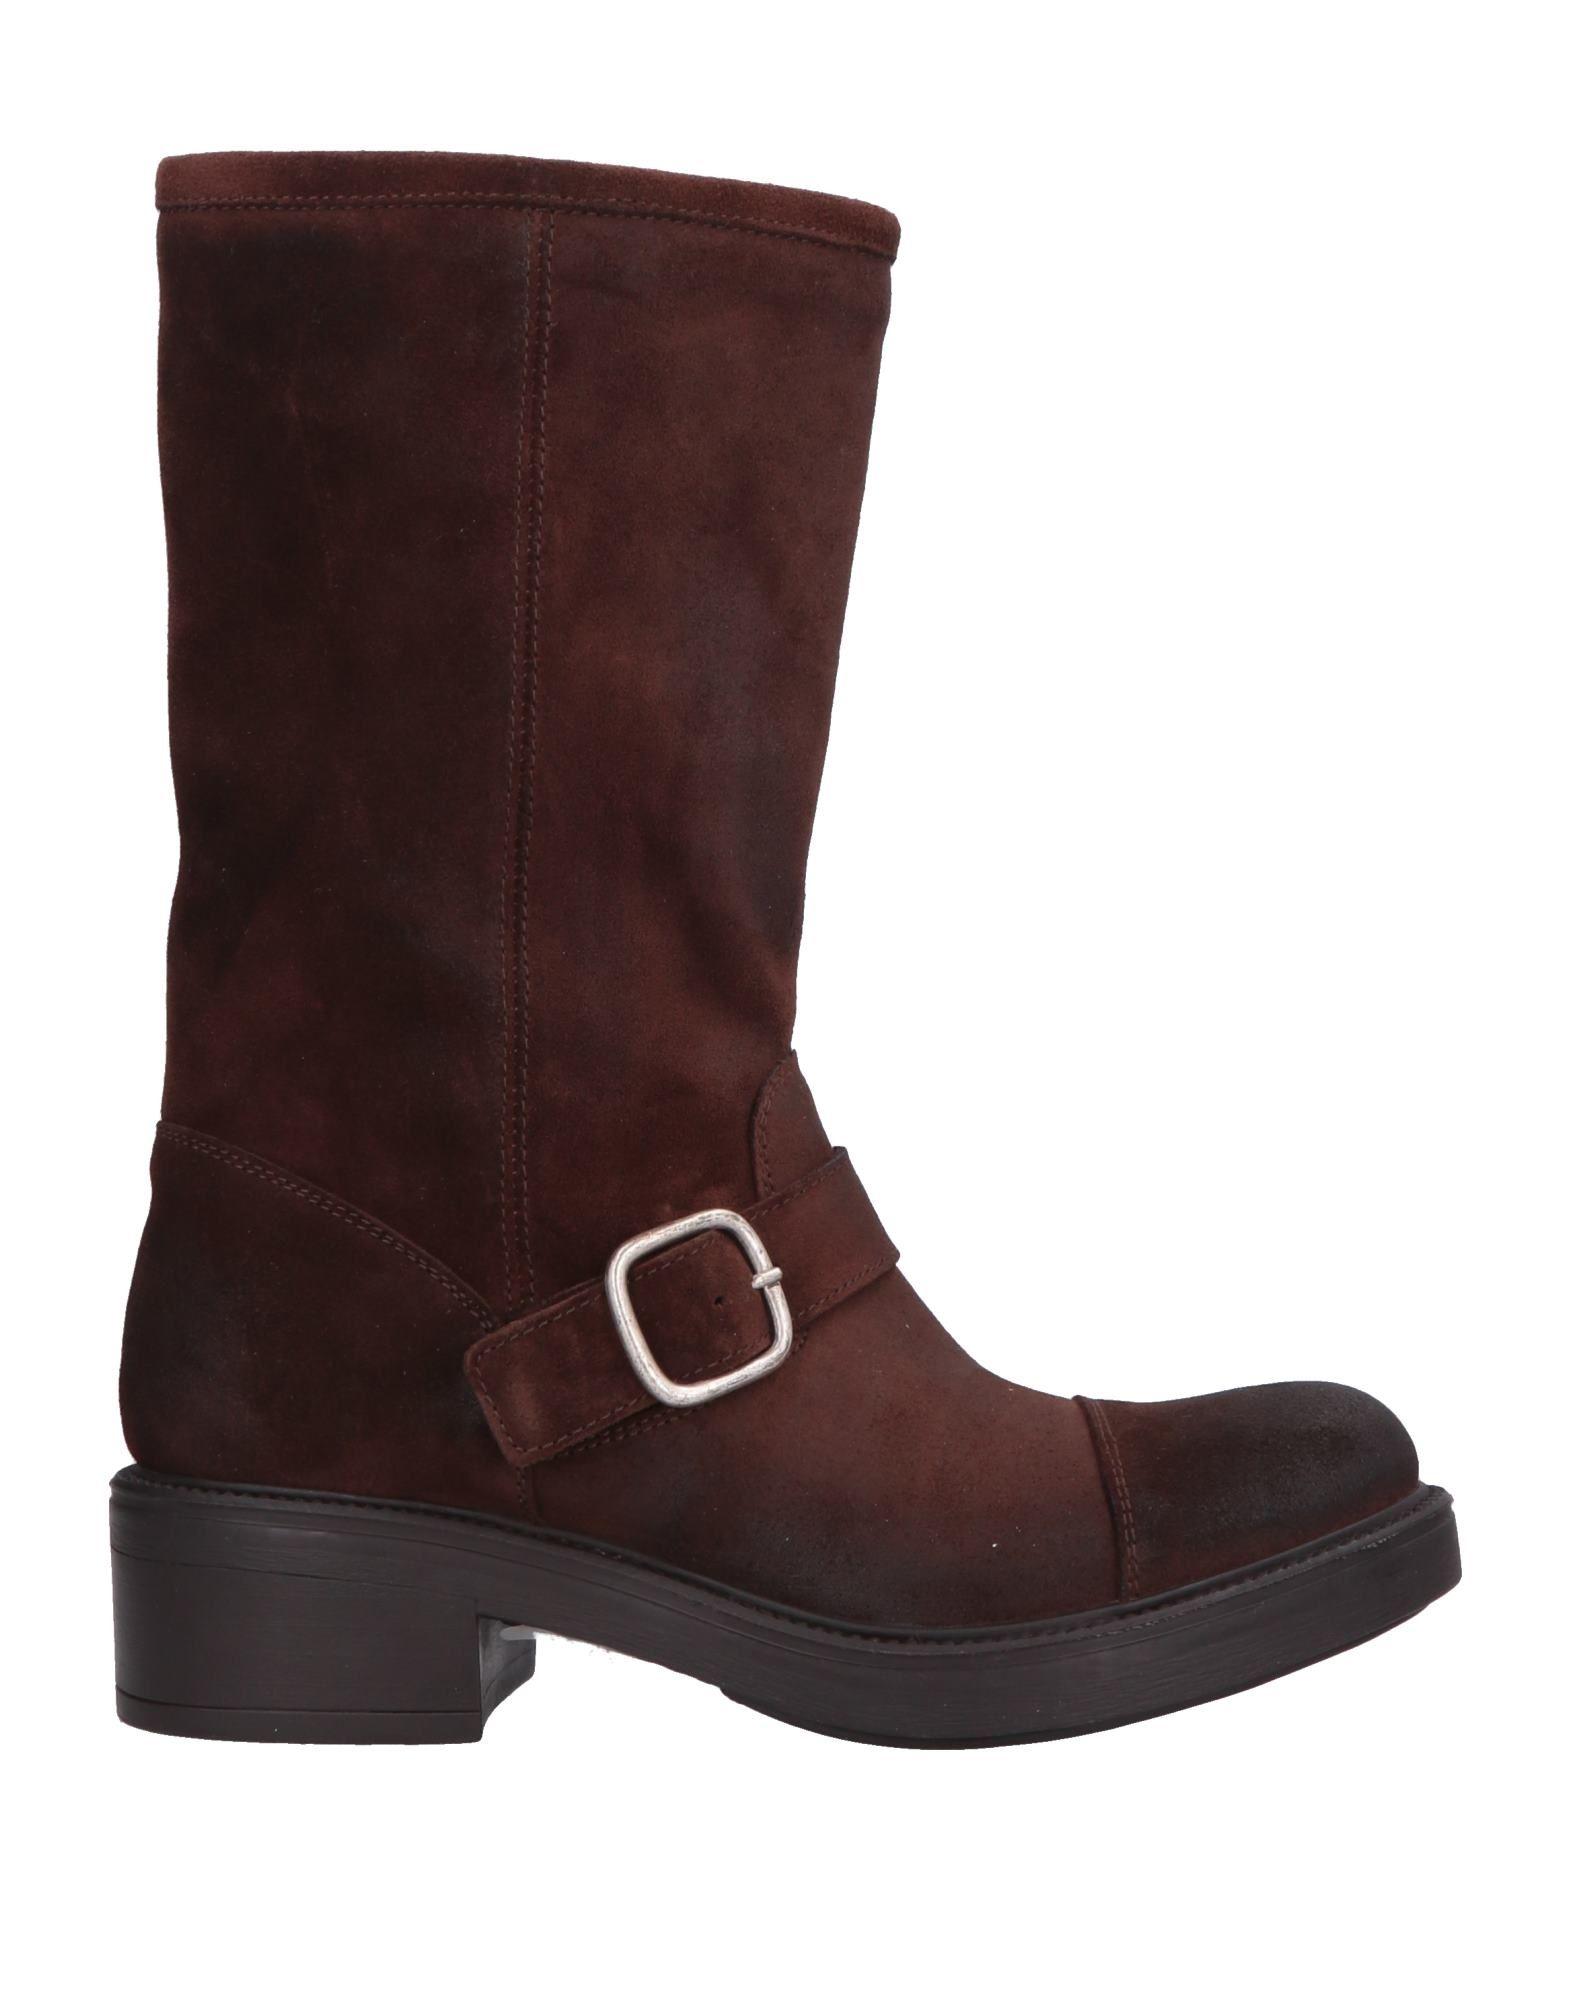 Strategia Leather Boots in Cocoa (Brown) - Lyst